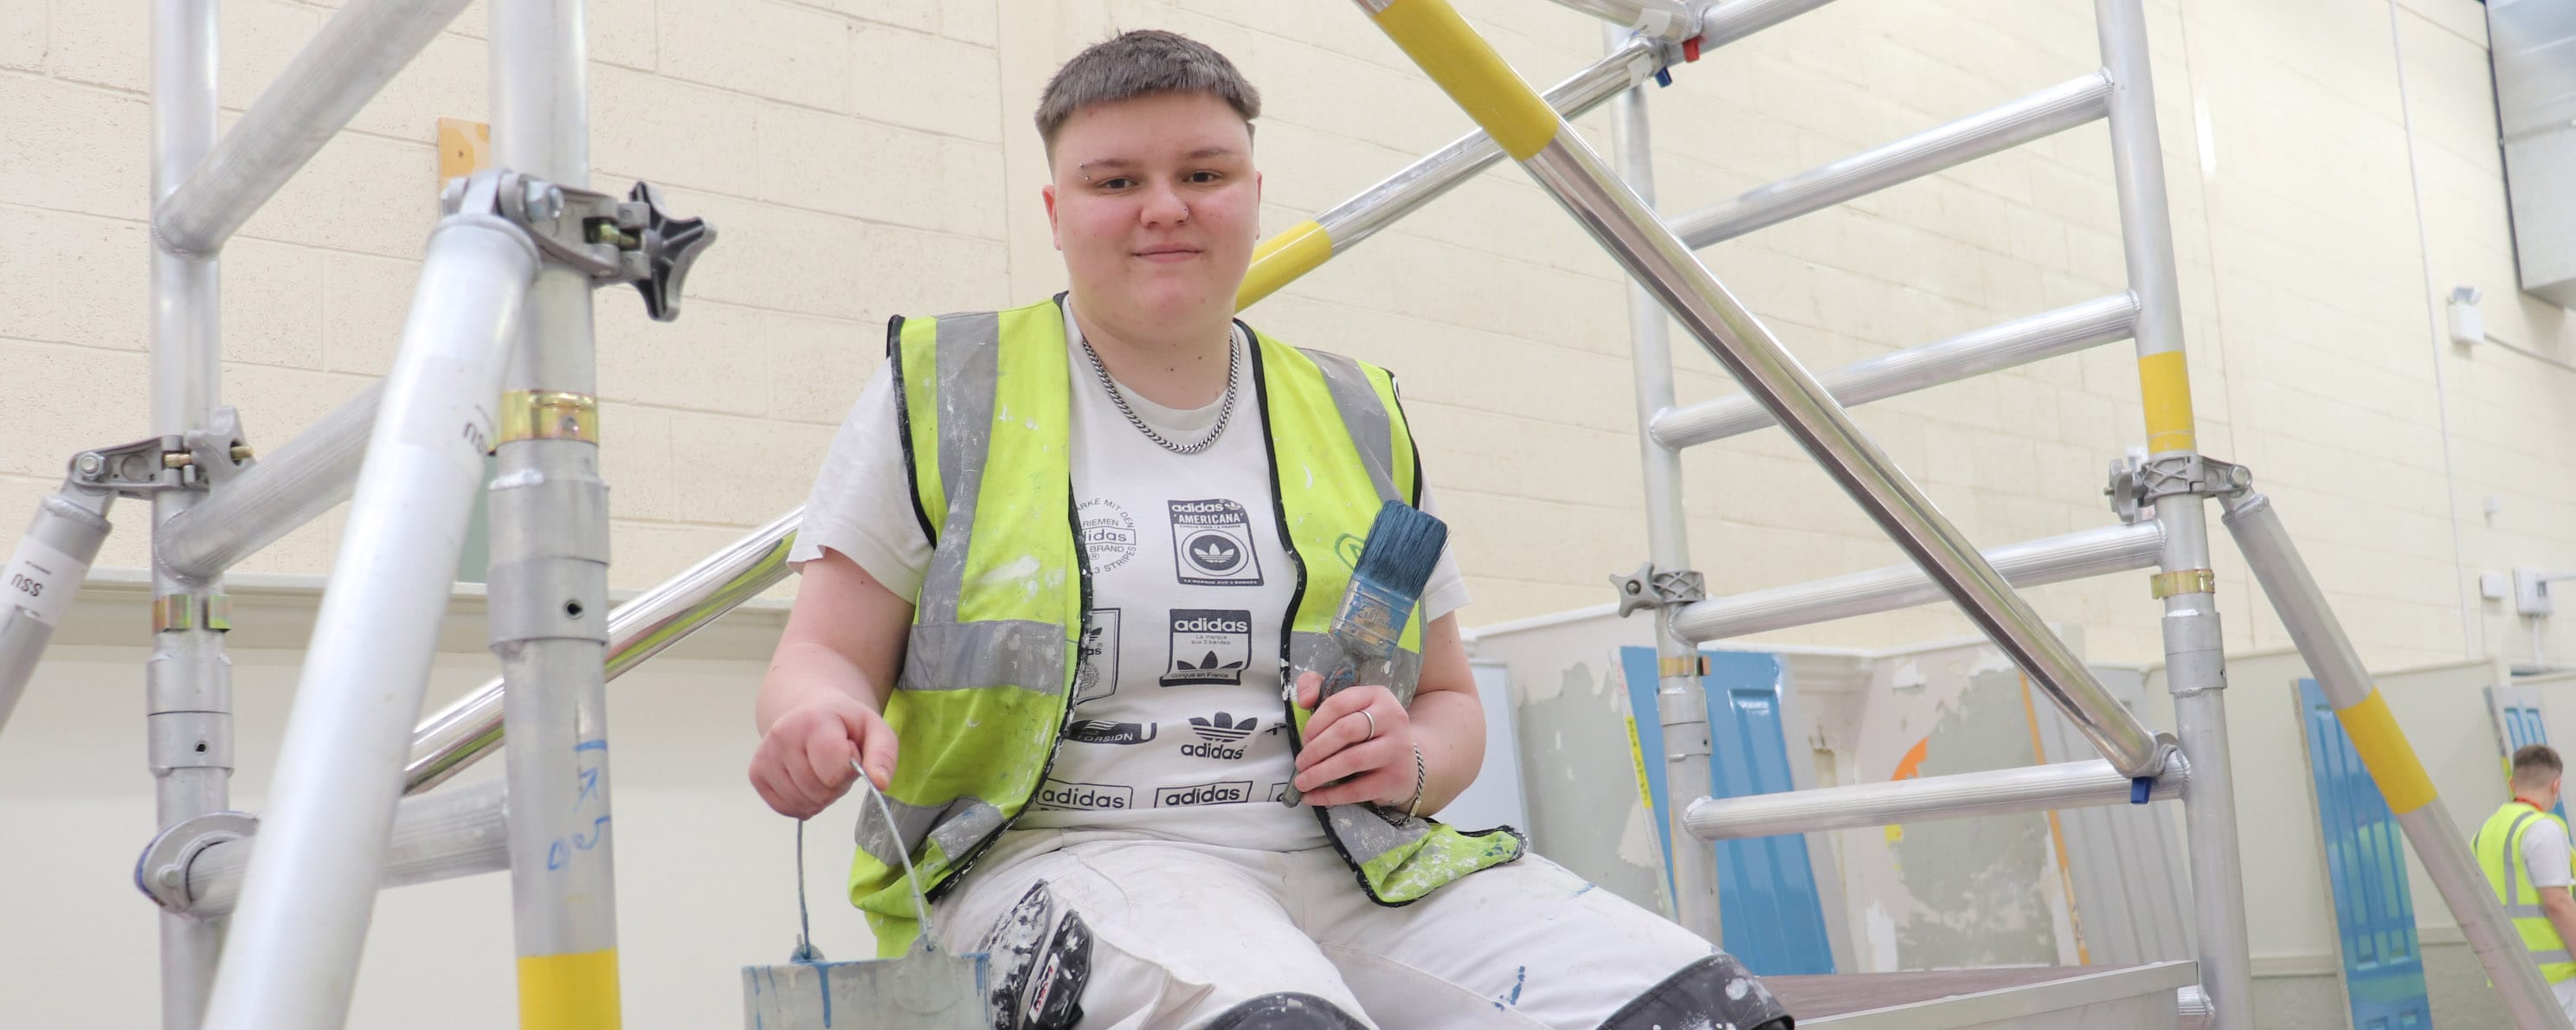 female painting and decorating apprentice sits on ladder facing